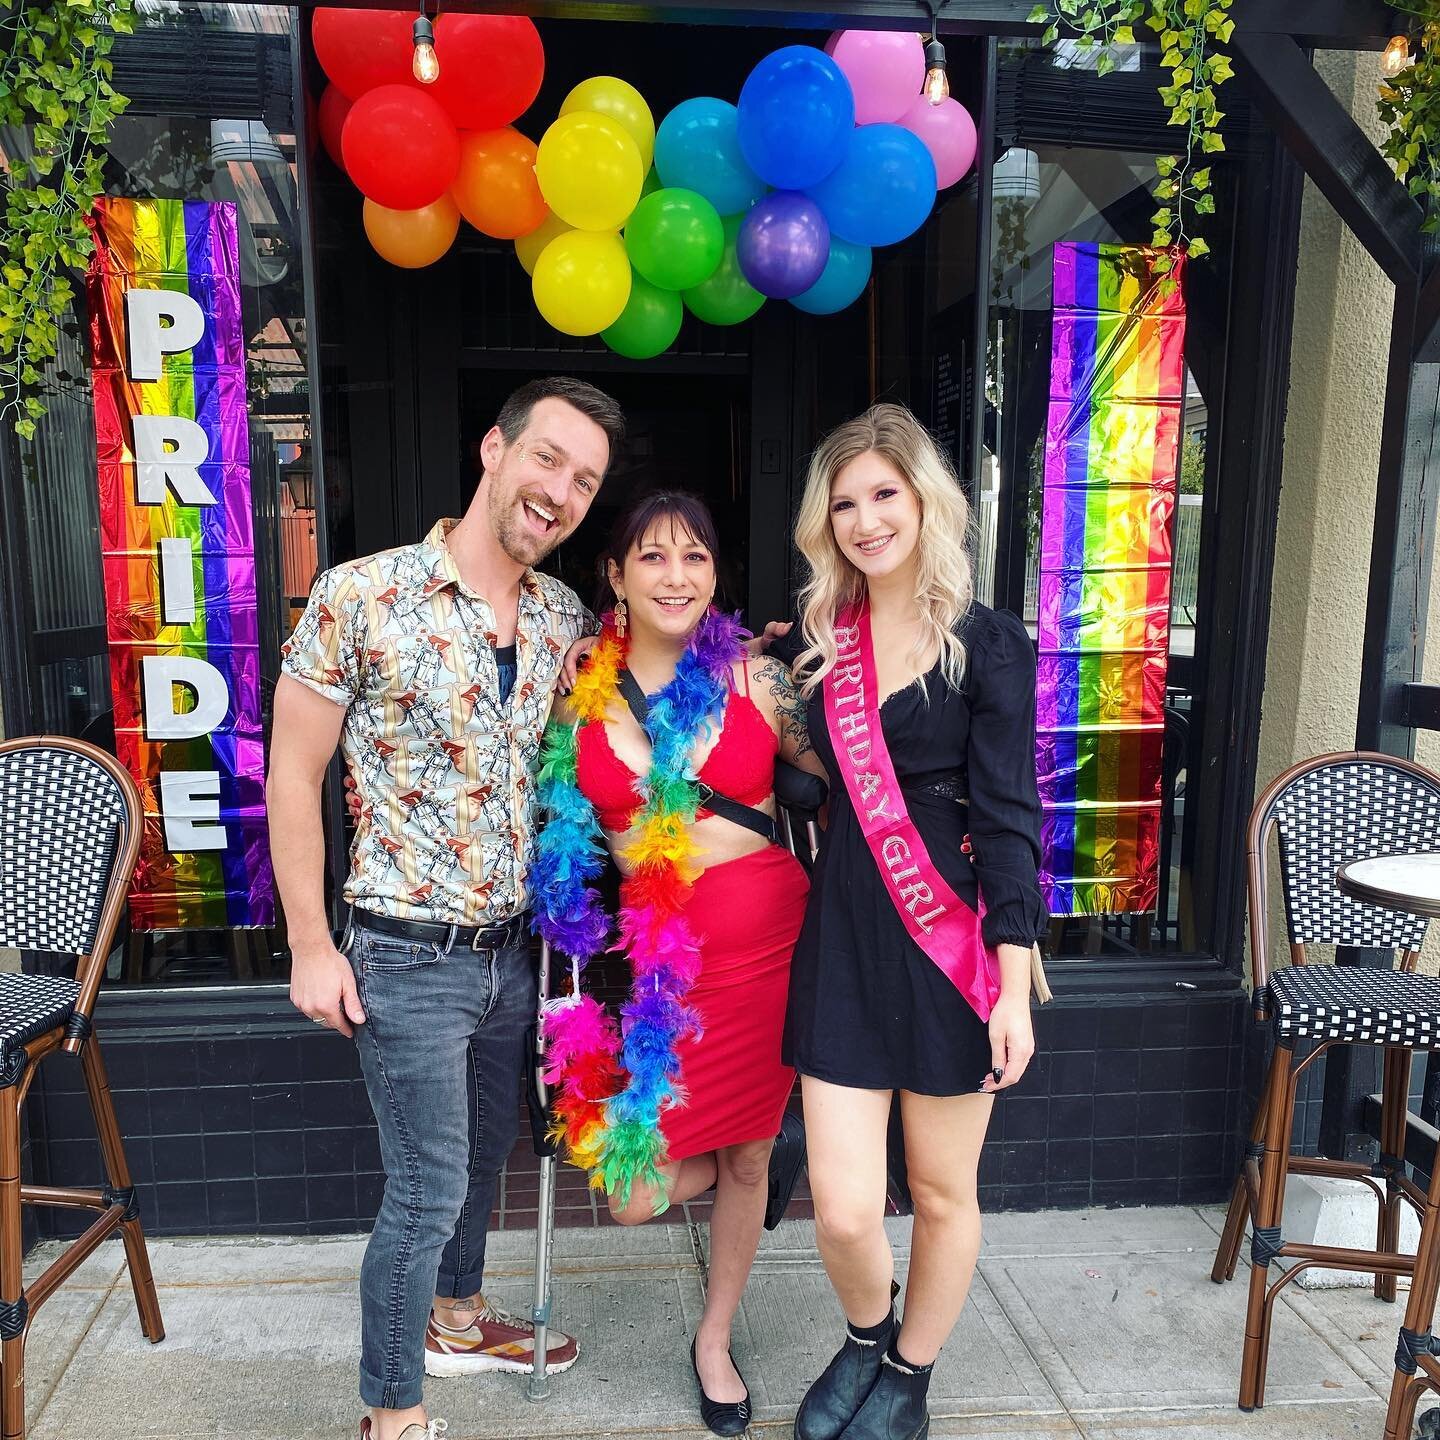 Happy pride Bellingham! Come celebrate with us after the parade. It&rsquo;s also @jeanna.lombardo birthday so come one come all to celebrate life today

Happy birthday Jeanna and happy pride Bellingham
- Jack&rsquo;s

#Jack&rsquo;s bar #jacksbarbelli